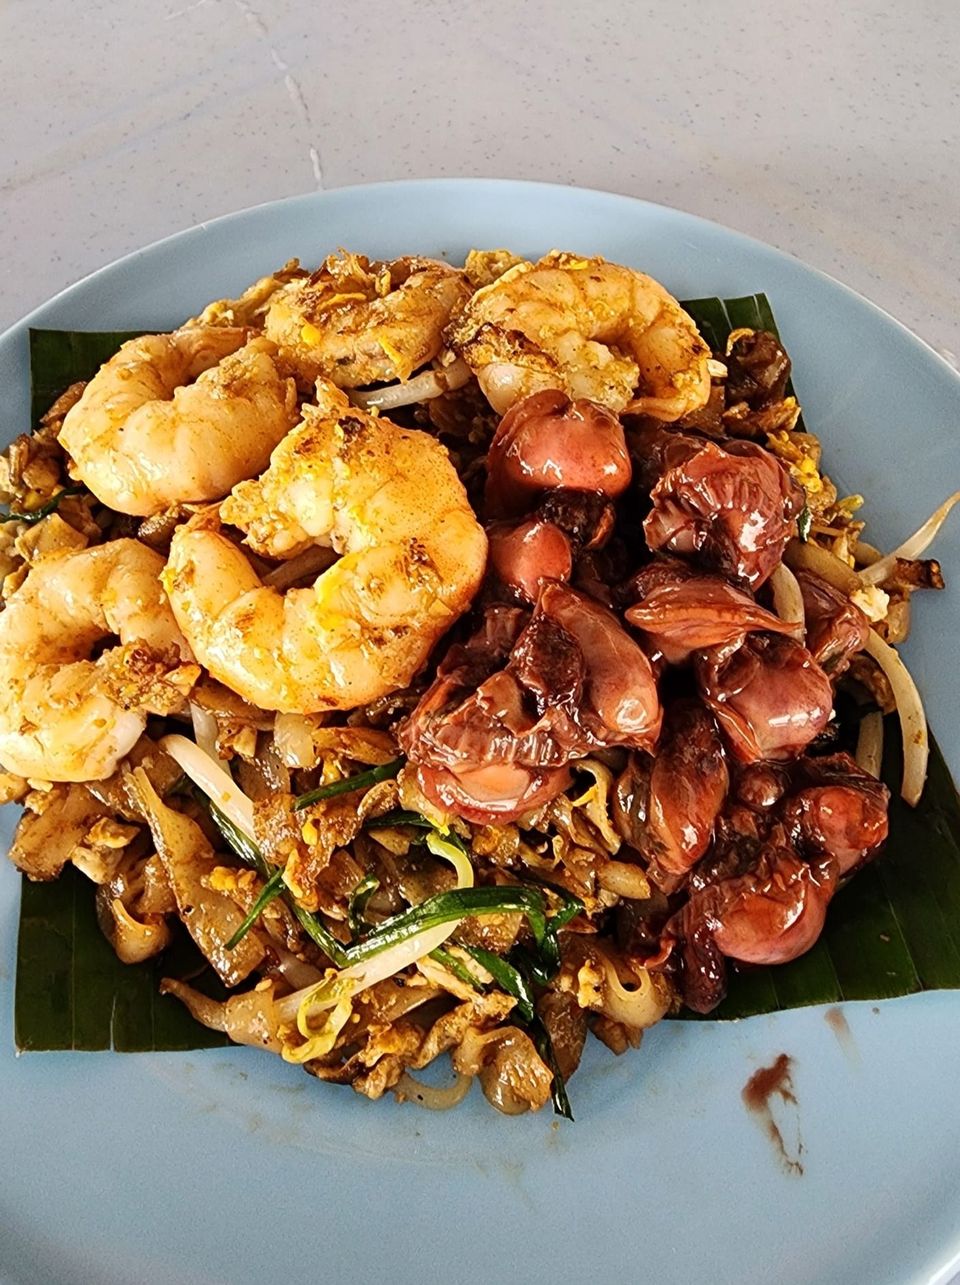 Lao Jia Char Keow Teow Has Lots of Prawns and Cockles